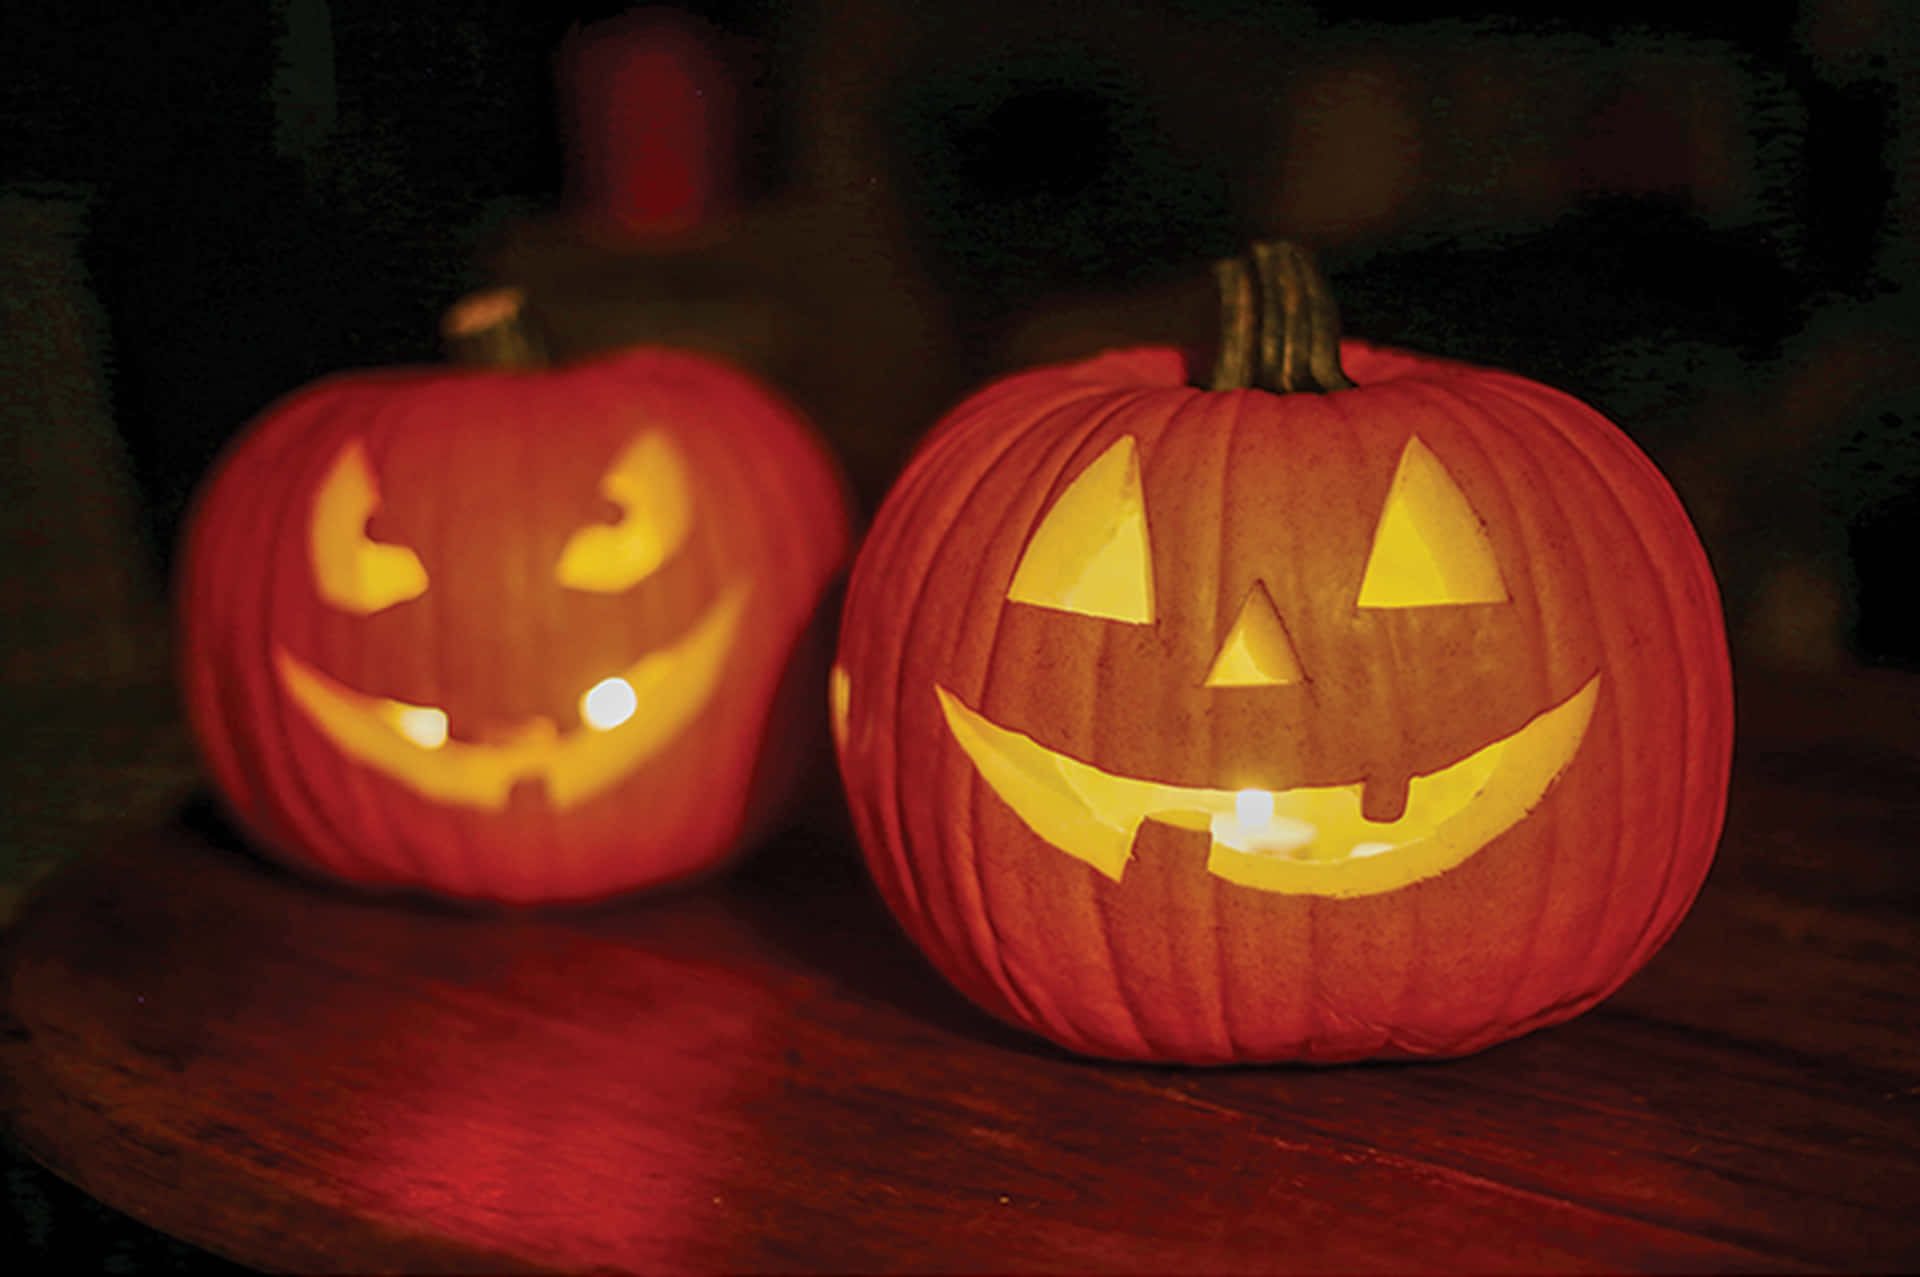 "A Traditional Carved Jack-o'-Lantern Just In Time for Halloween"